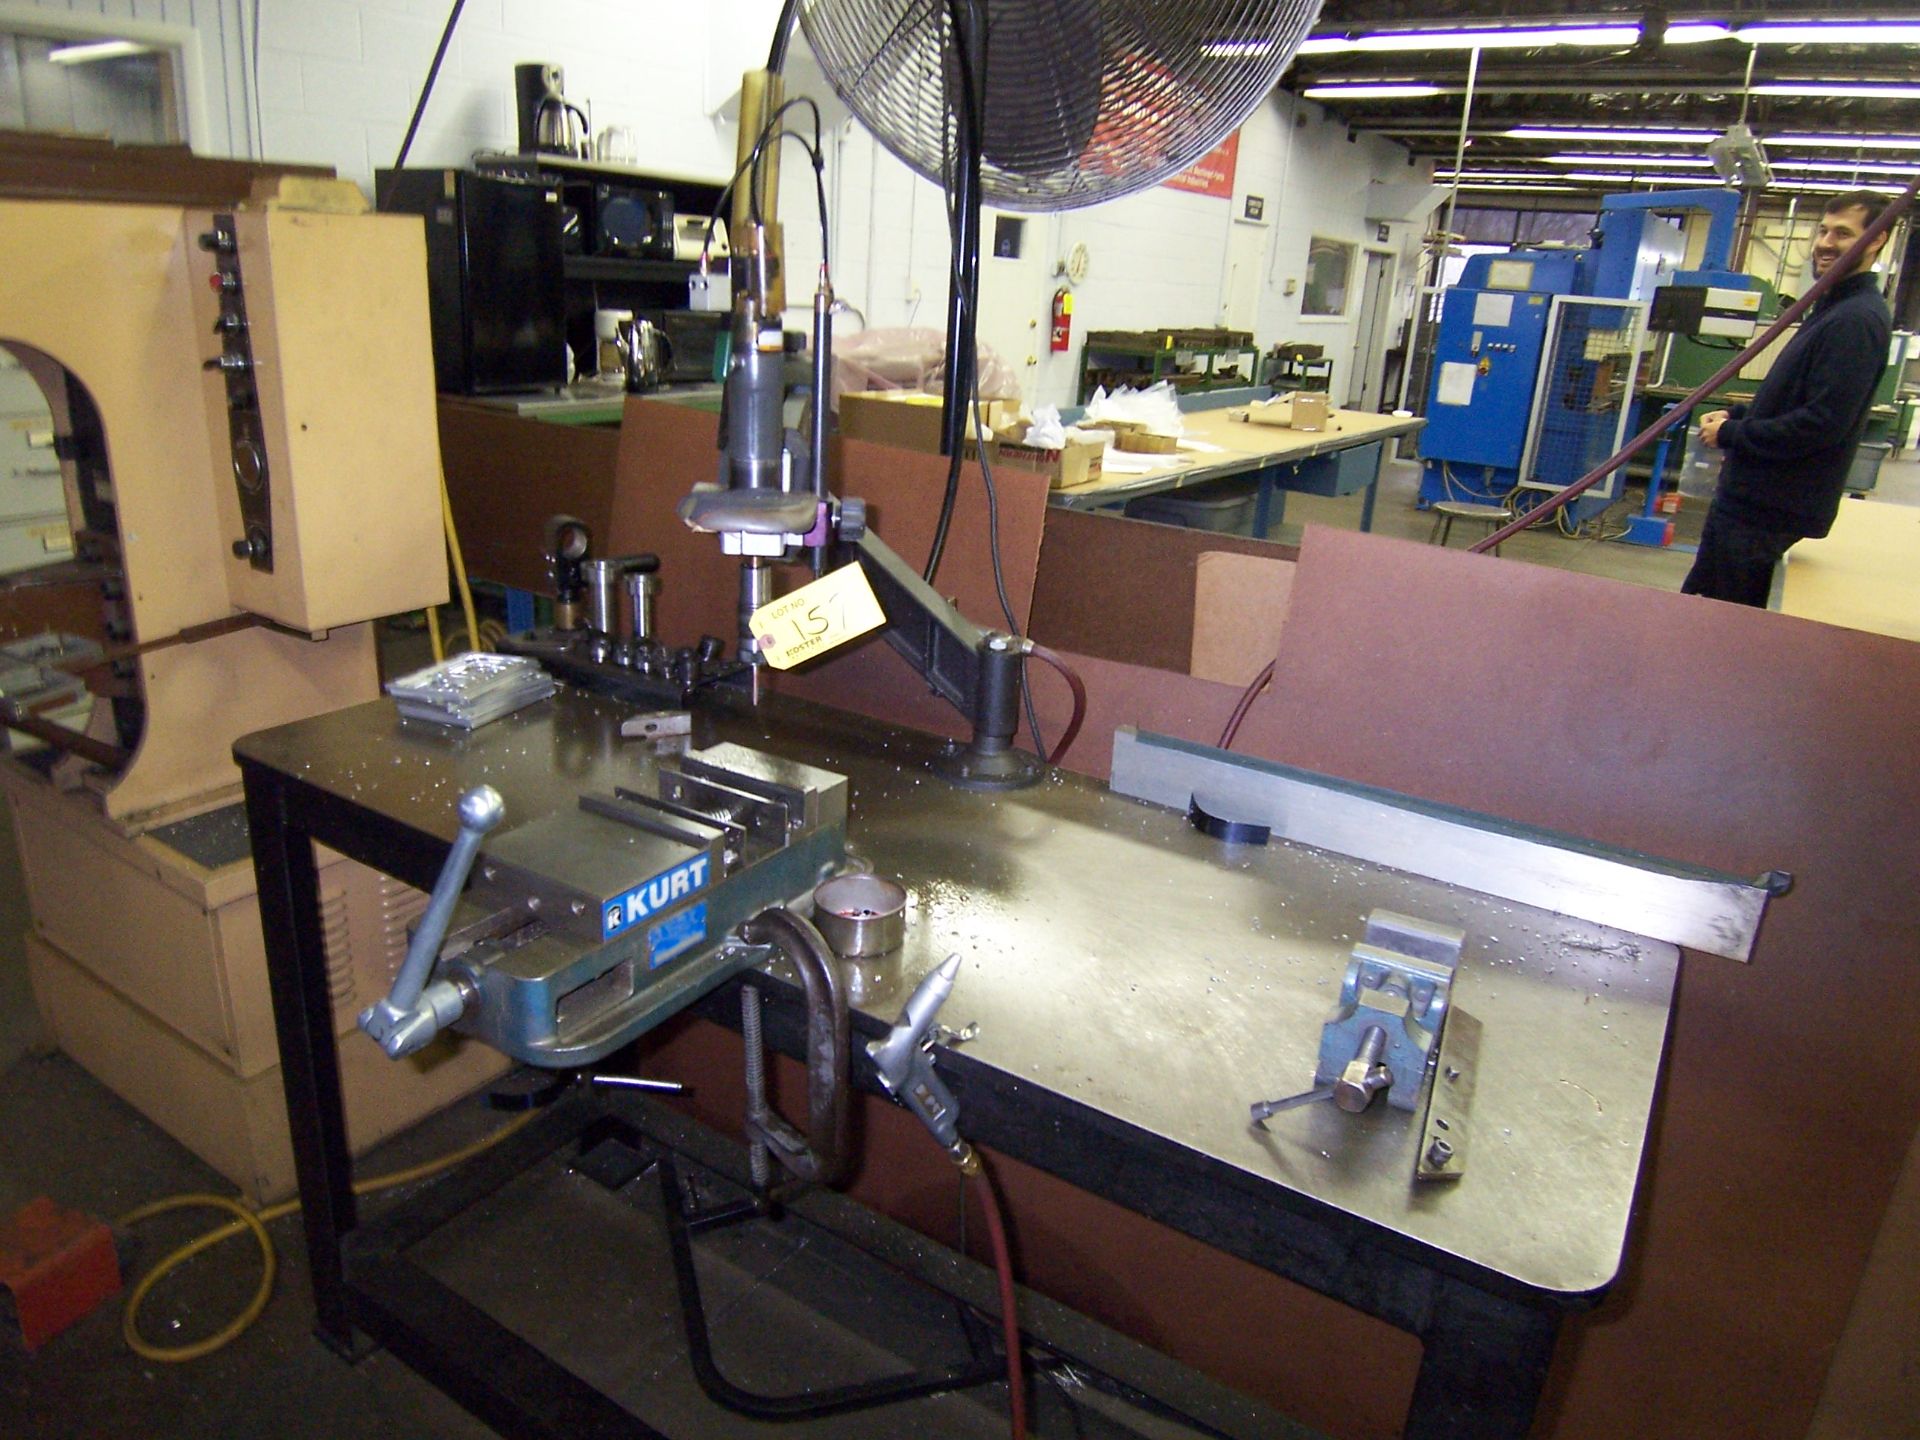 FLEX ARM PNEUMATIC TORQUE DRIVER / TAPPER, WITH VISE & STEEL TABLE - Image 2 of 2